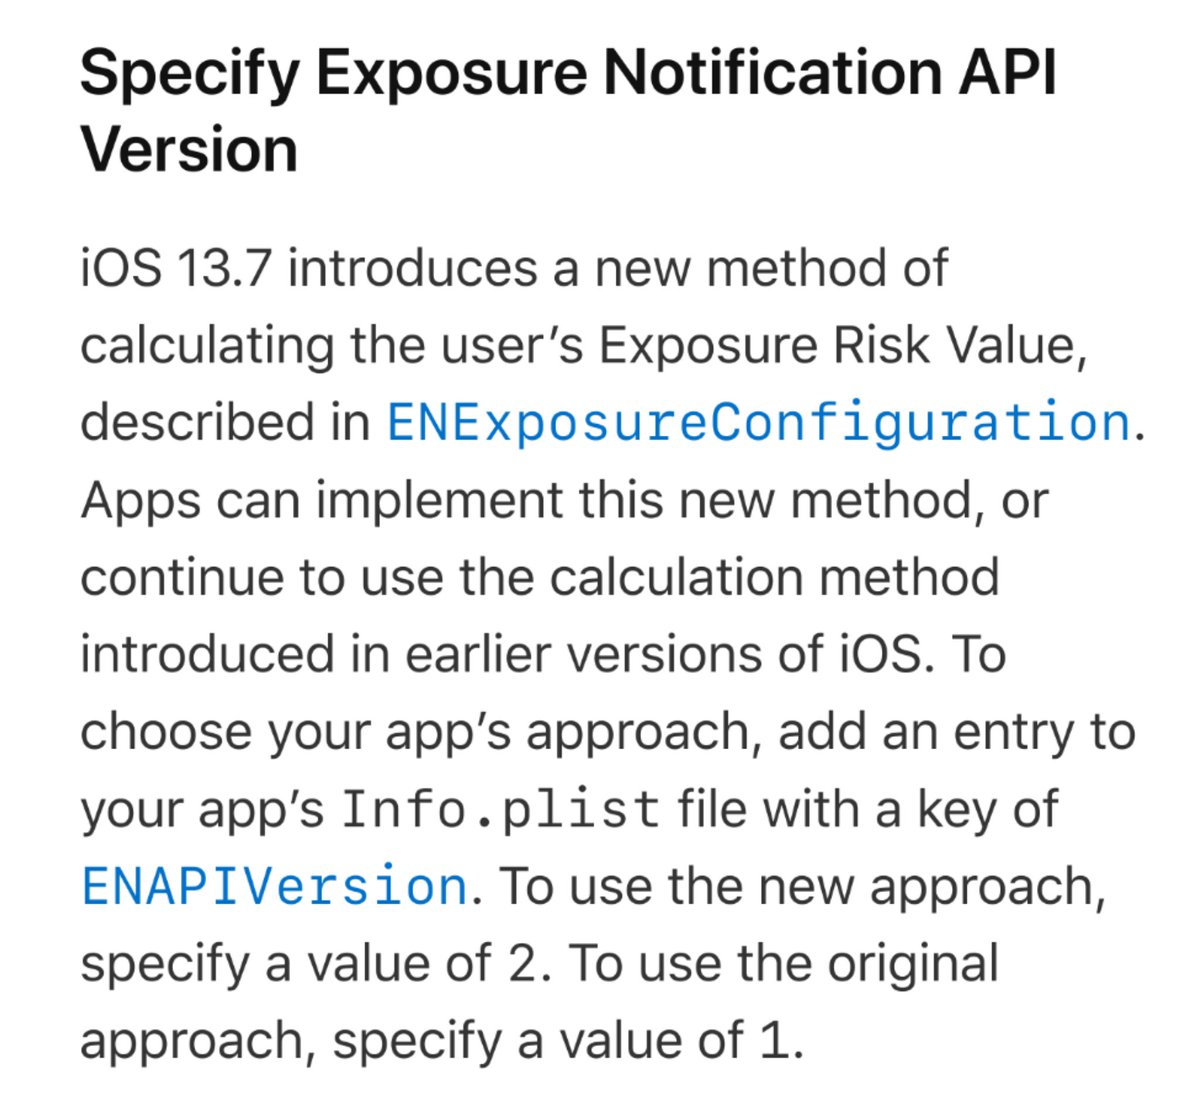 Meanwhile,  @Apple's  #iOS 13.7 which first incorporated  #ExposureNotificationExpress into the operating system was launched at the beginning of September: https://www.forbes.com/sites/davidphelan/2020/09/01/apple-releases-ios-137-surprise-update-with-indispensable-covid-19-upgrade/and this update also included a new method to calculate  #ExposureRiskValue: https://developer.apple.com/documentation/exposurenotification